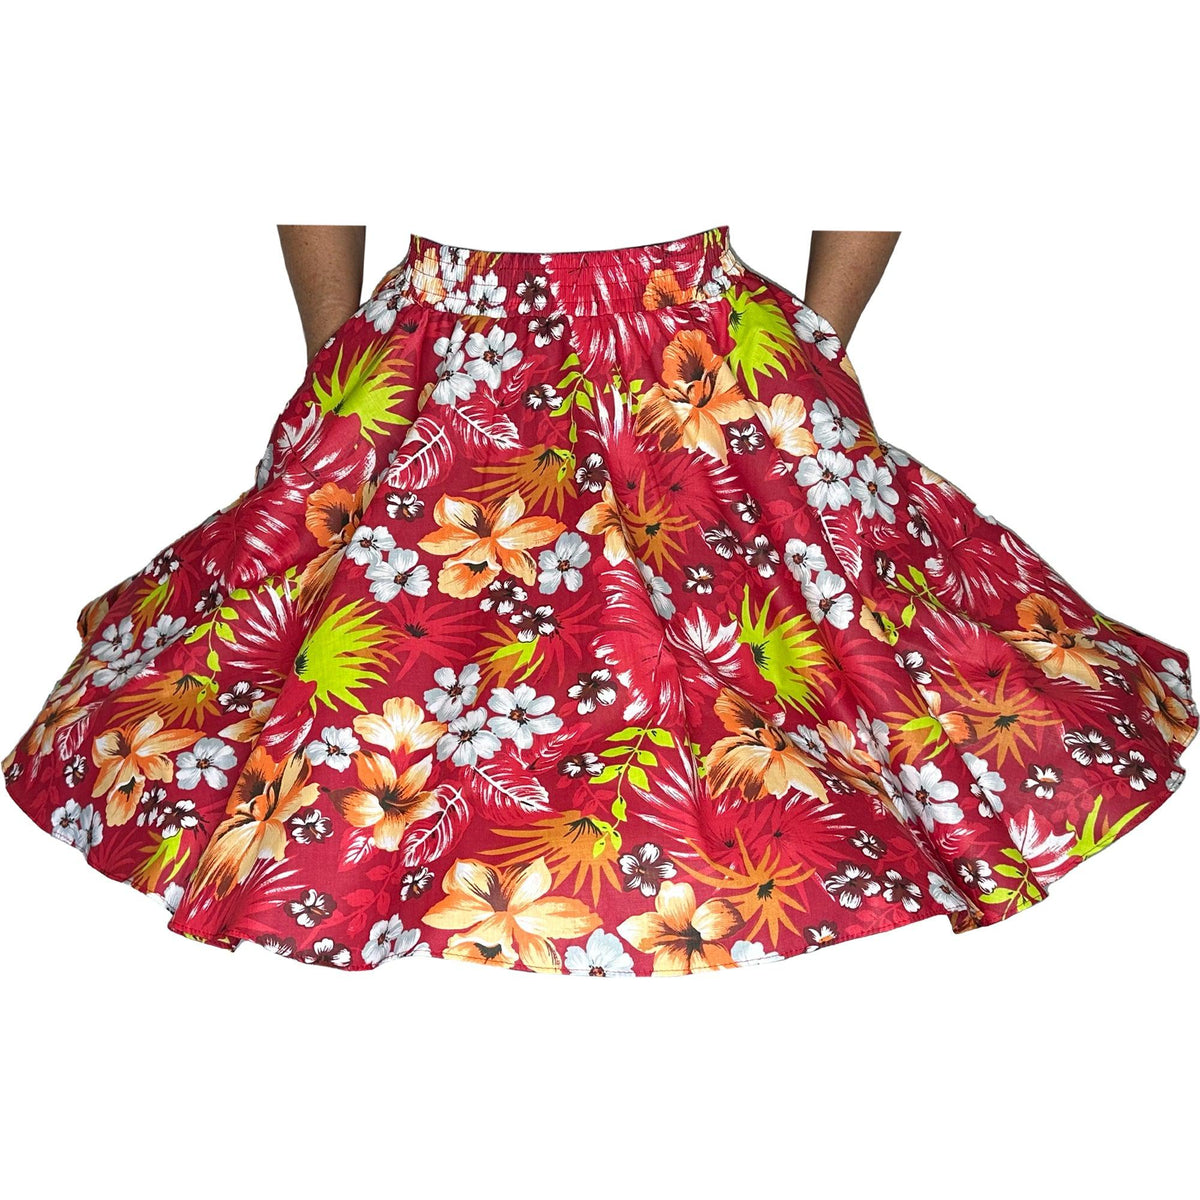 A woman wearing a red Tropical Hawaiian Square Dance Skirt with palm leaves and Hibiscus flowers from Square Up Fashions.